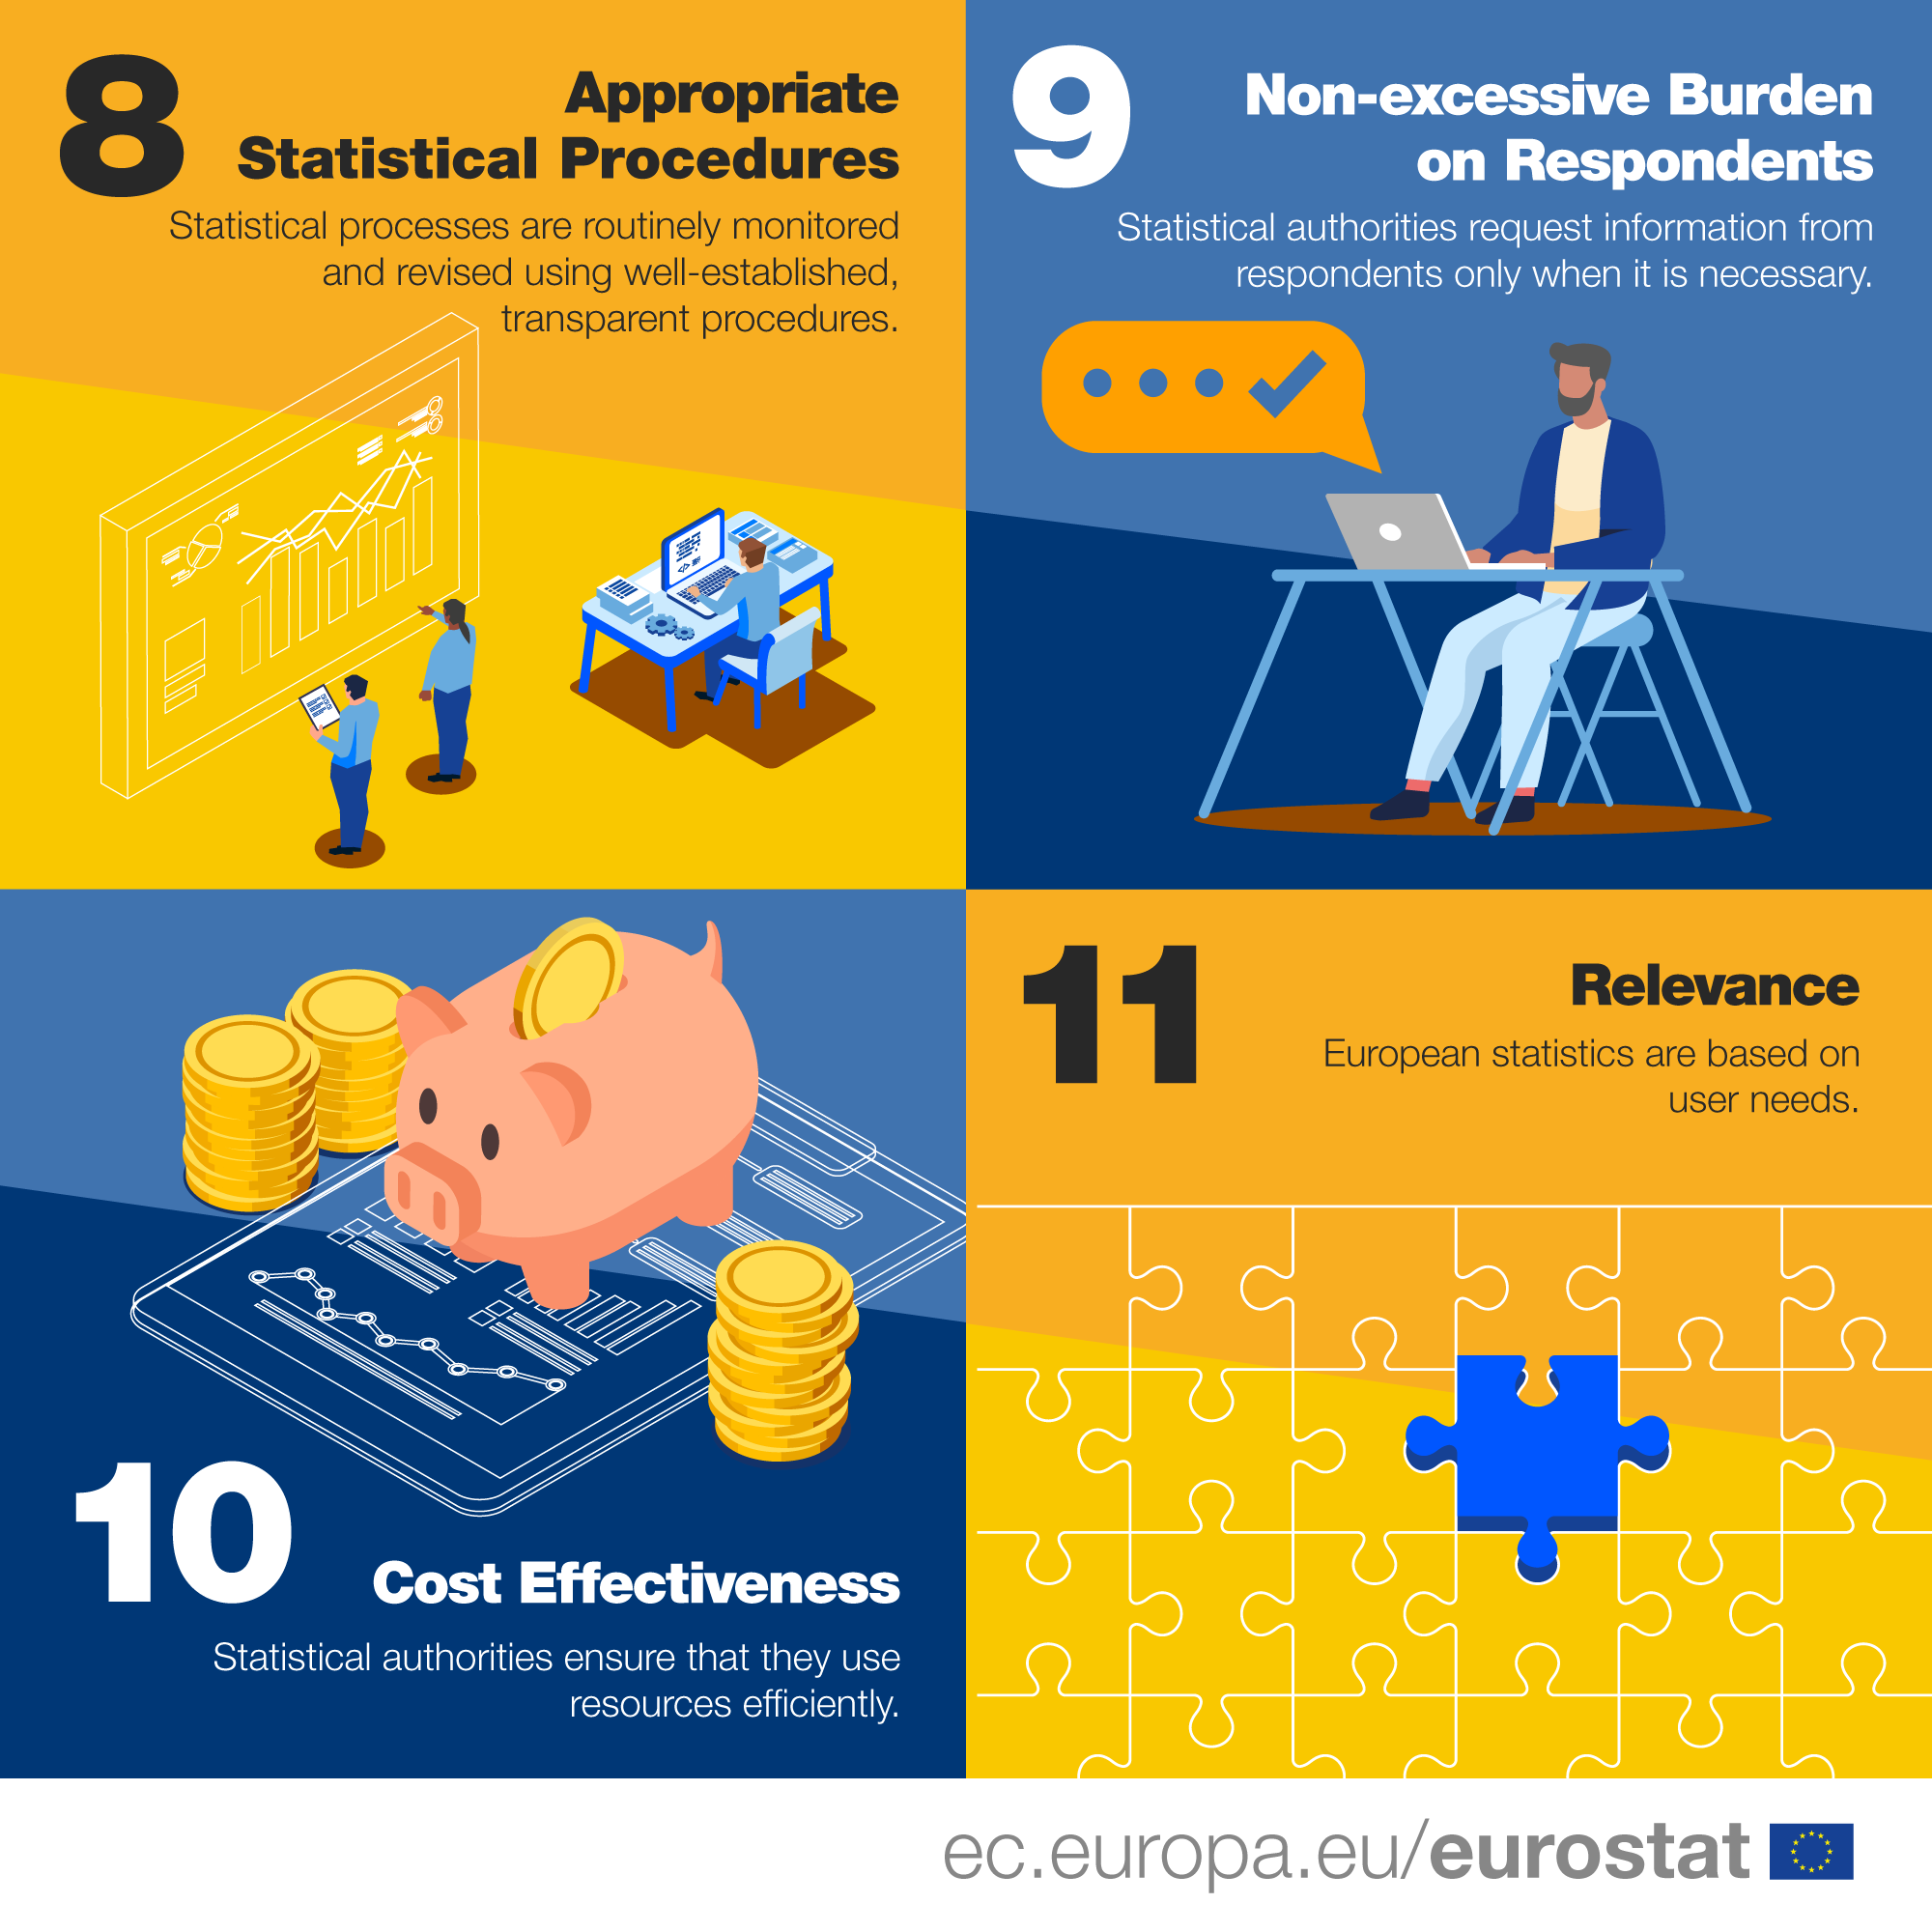 Infographic Code of Practice: 8 Appropriate Statistical Procedures Statistical processes are routinely monitored and revised using well-established, transparent procedures. 9 Non-excessive Burden on Respondents Statistical authorities request information from respondents only when it is necessary. 10 Cost Effectiveness Statistical authorities ensure that they use resources efficiently. 11 Relevance European statistics are based on user needs.